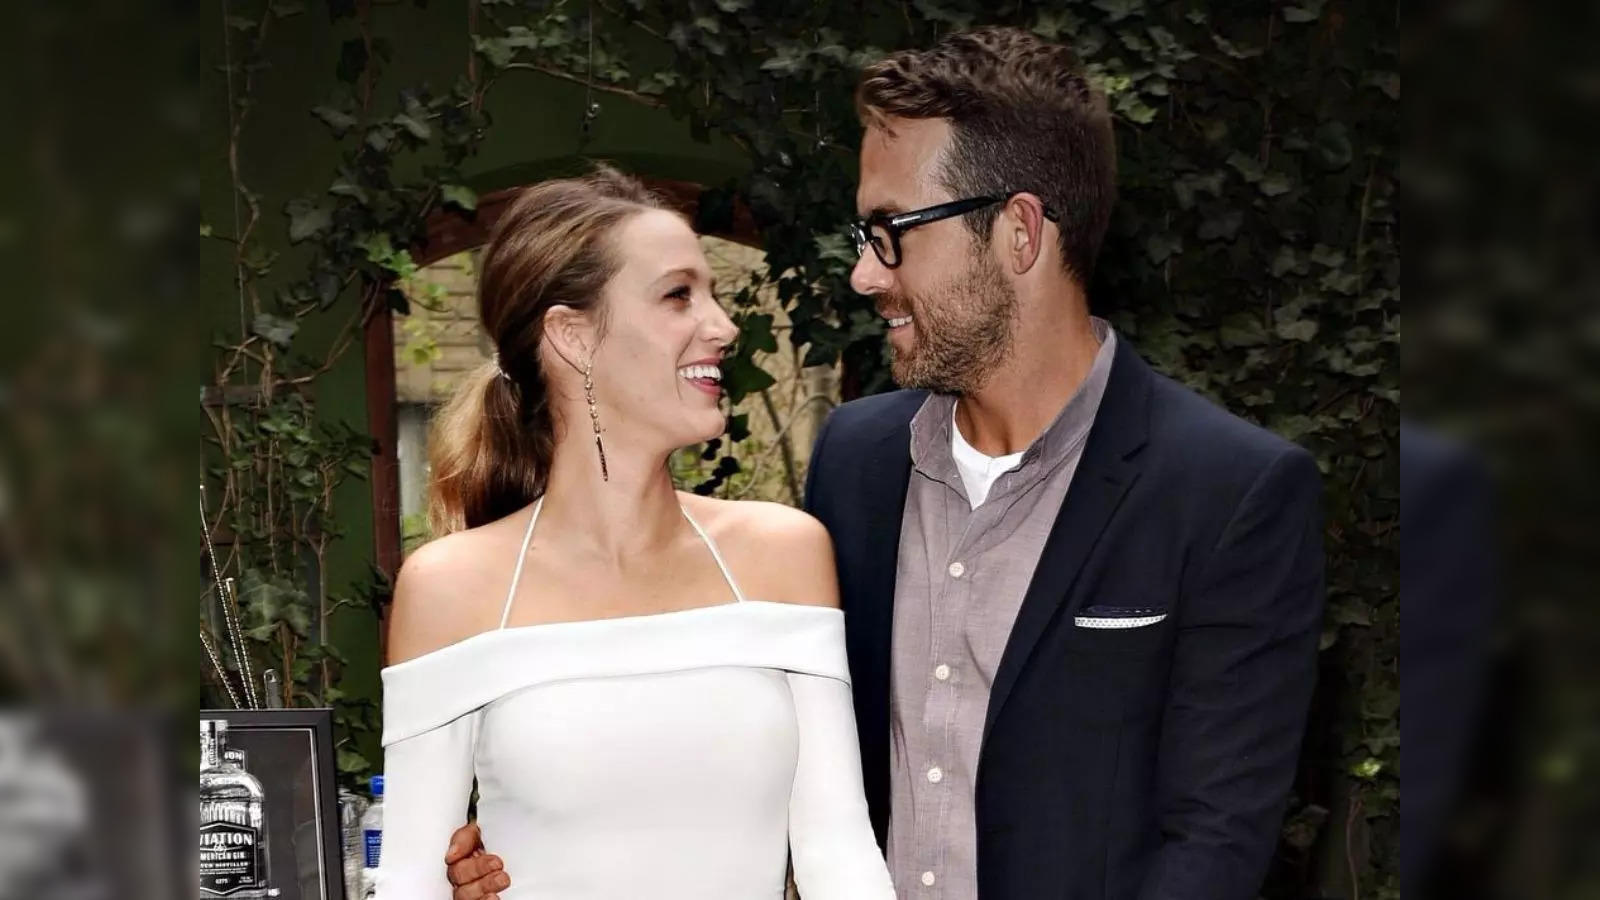 Blake Lively, Ryan Reynolds Are 'Thrilled' With 4th Child's Arrival